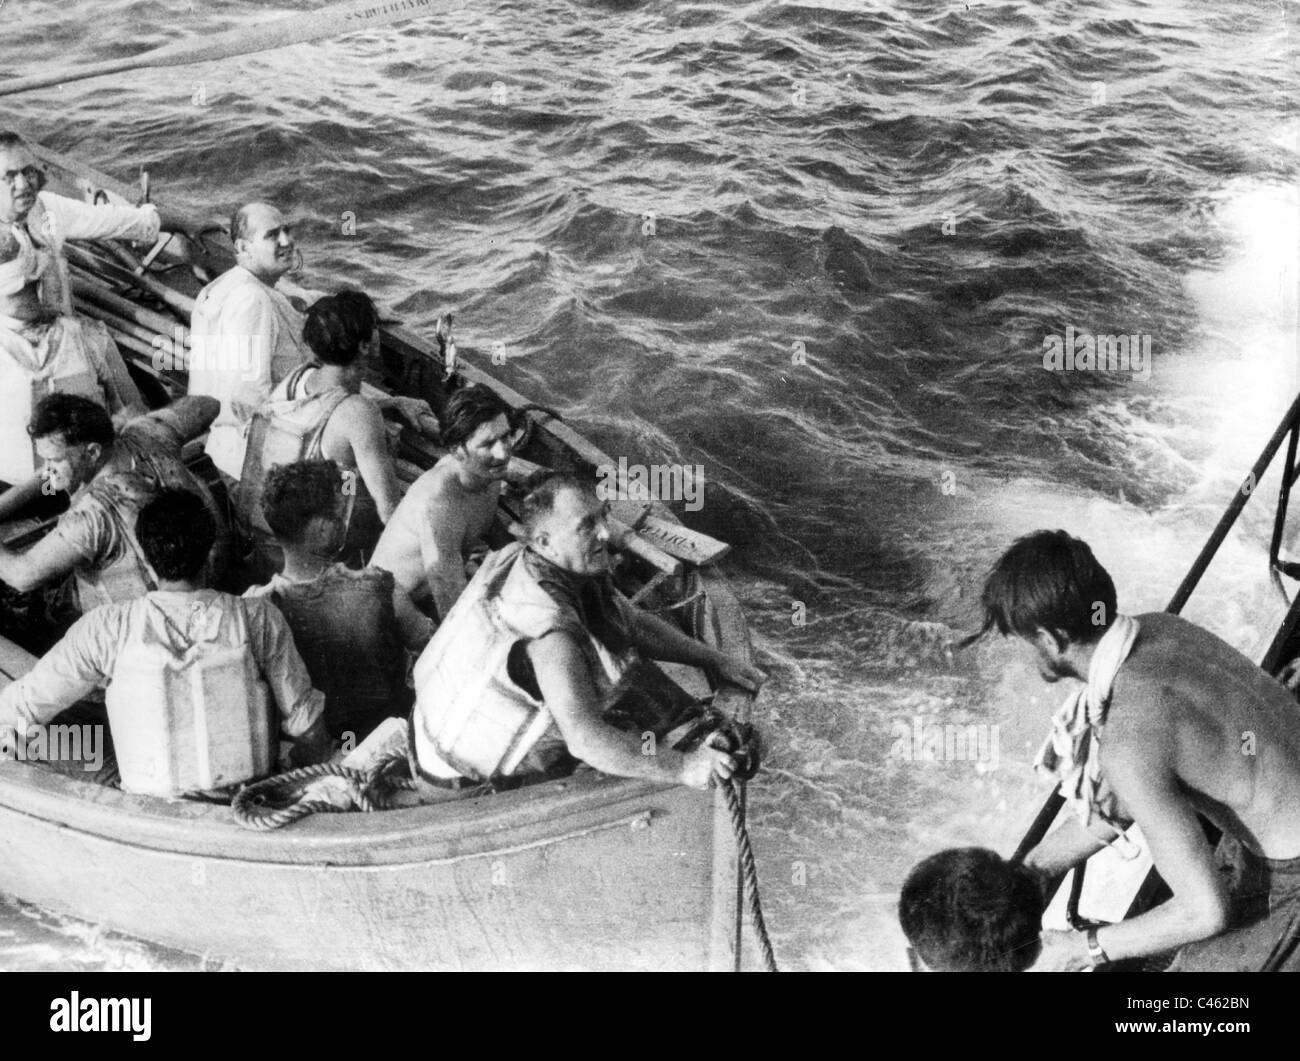 U-boat campaign in the Second World War: Allied shipwrecked Stock Photo